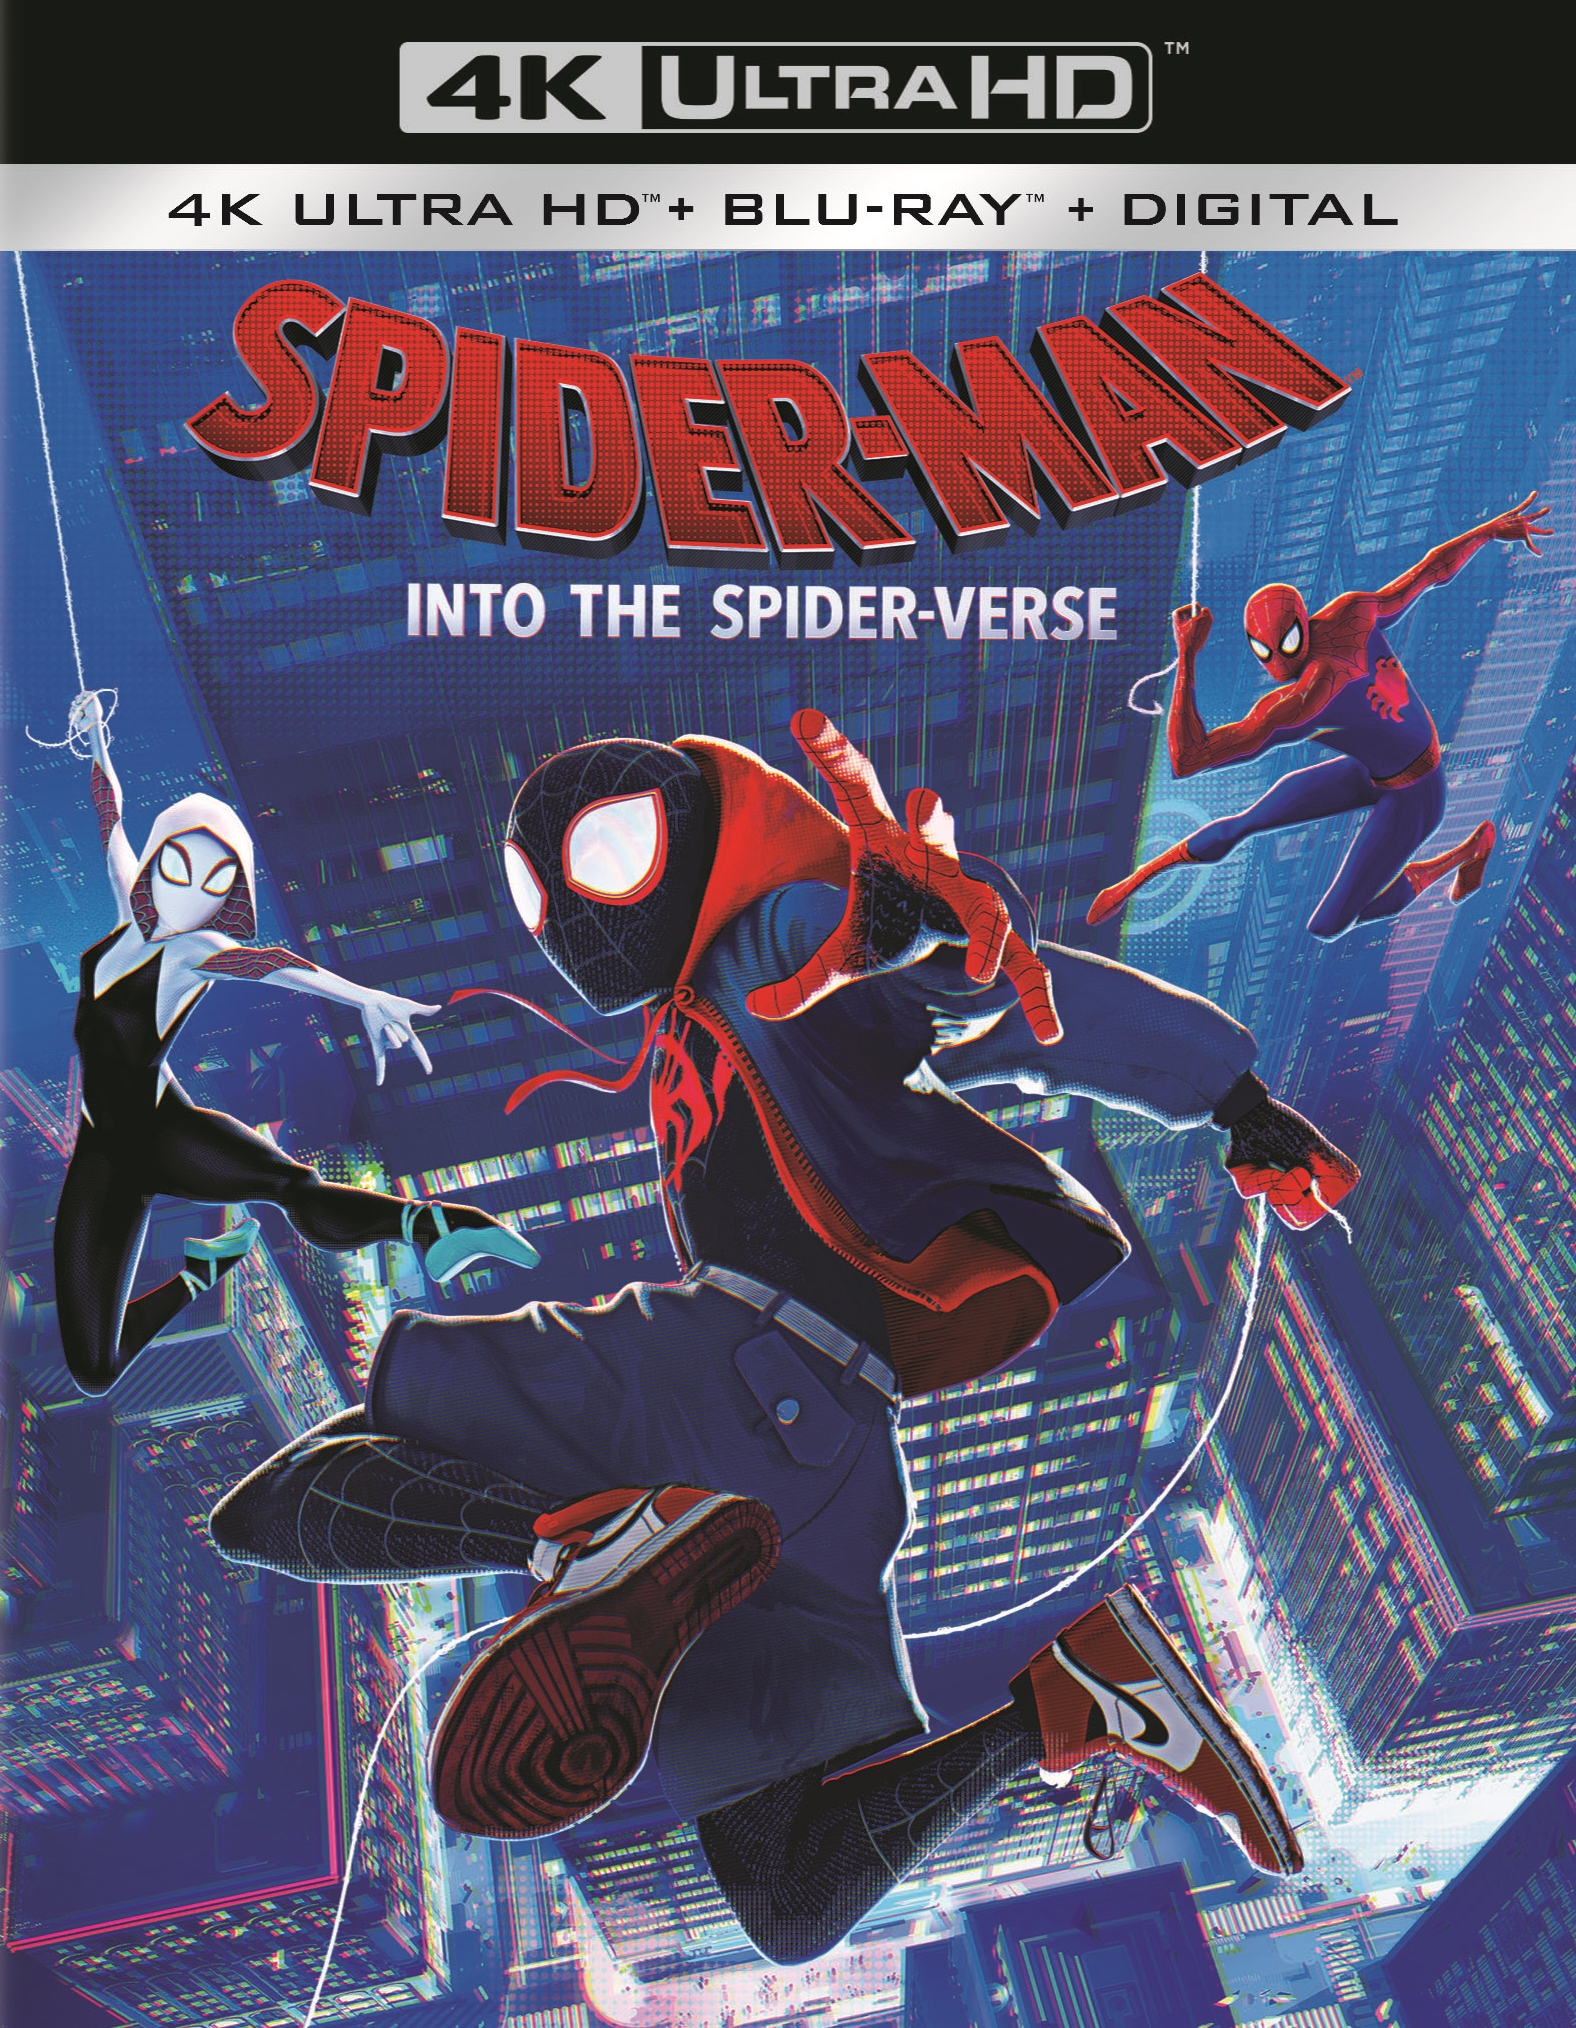 Spider-Man: Into the Spider-Verse [Includes Digital Copy] [4K Ultra HD Blu-ray/Blu-ray] [2018]